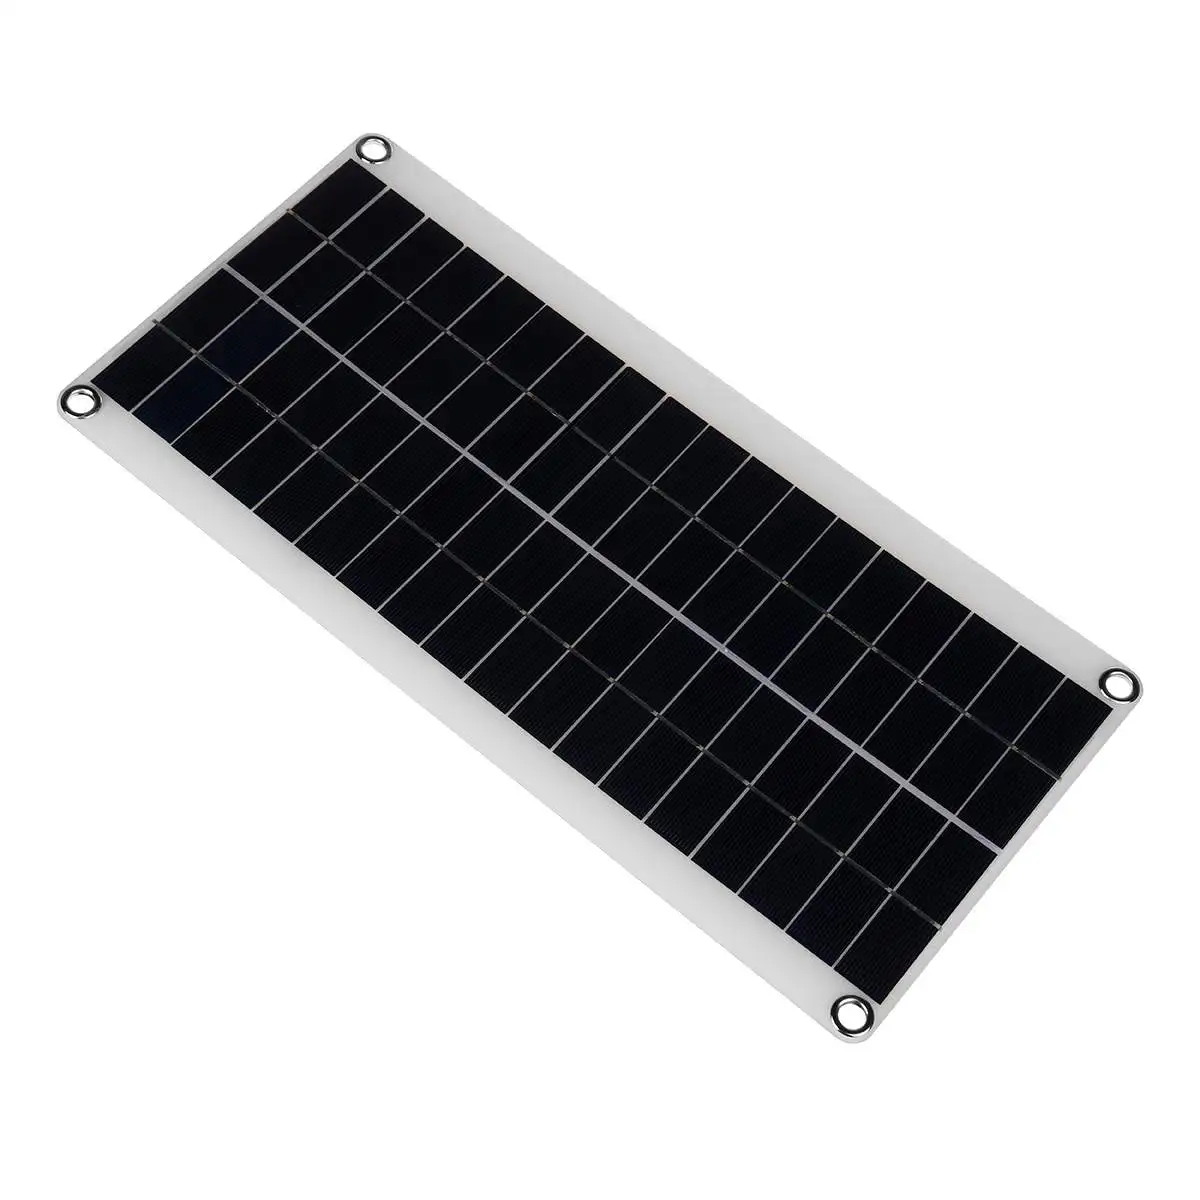 100w portable solar panel double usb power bank board external battery charging car charger solar cell board 410x200mm free global shipping